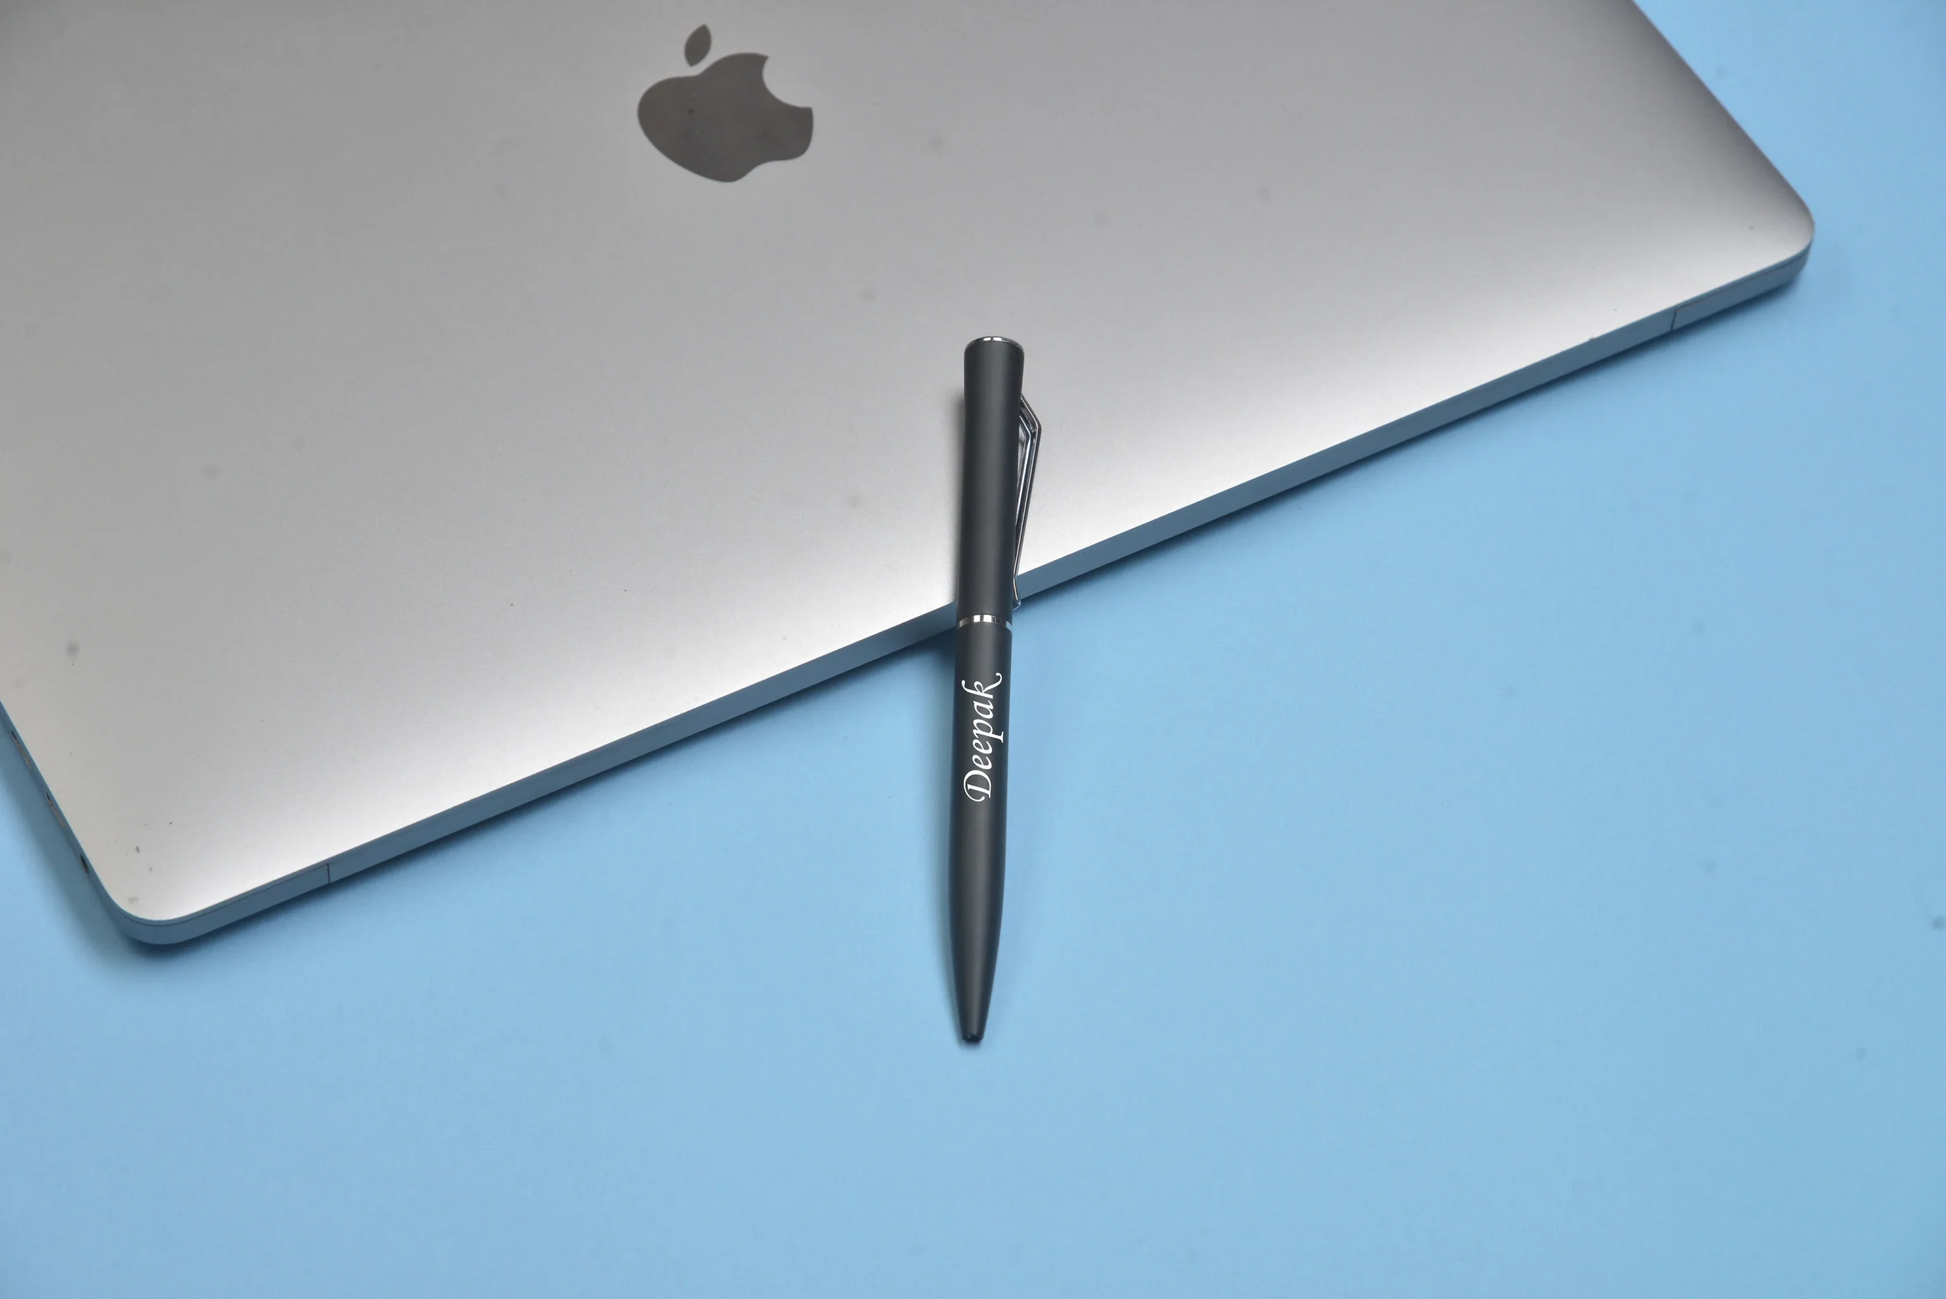 "Write with confidence and precision with our high-quality pen. Ideal for professionals and for signing important documents."